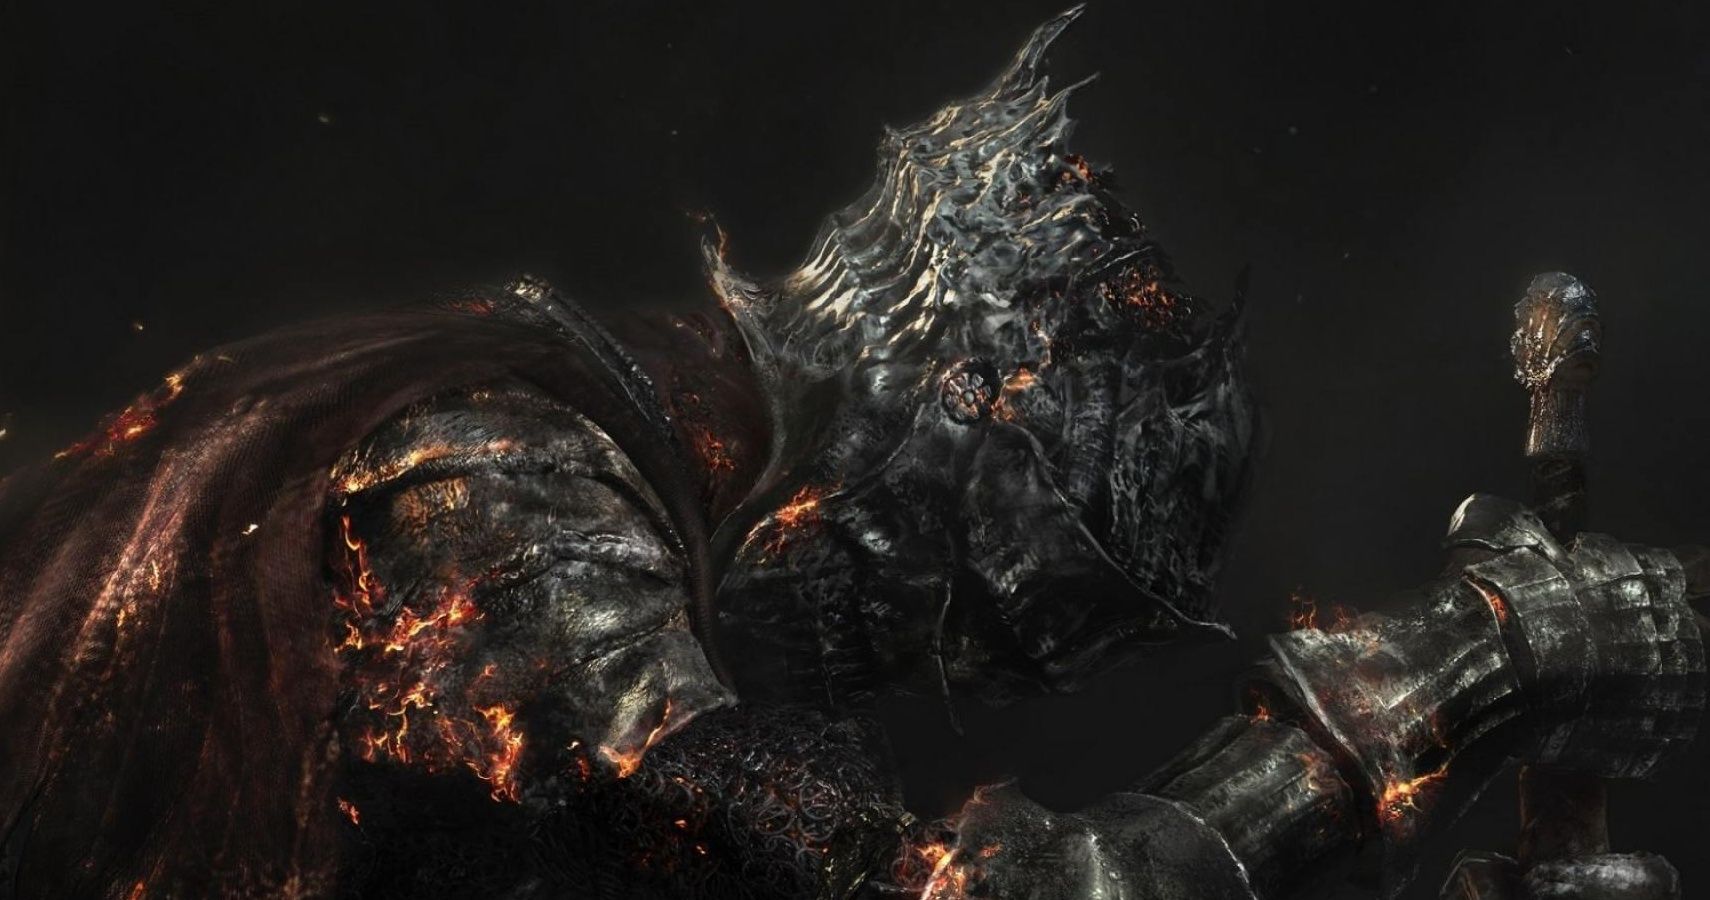 10 Awesome Dark Souls 3 Mods That Make The Game Even Better